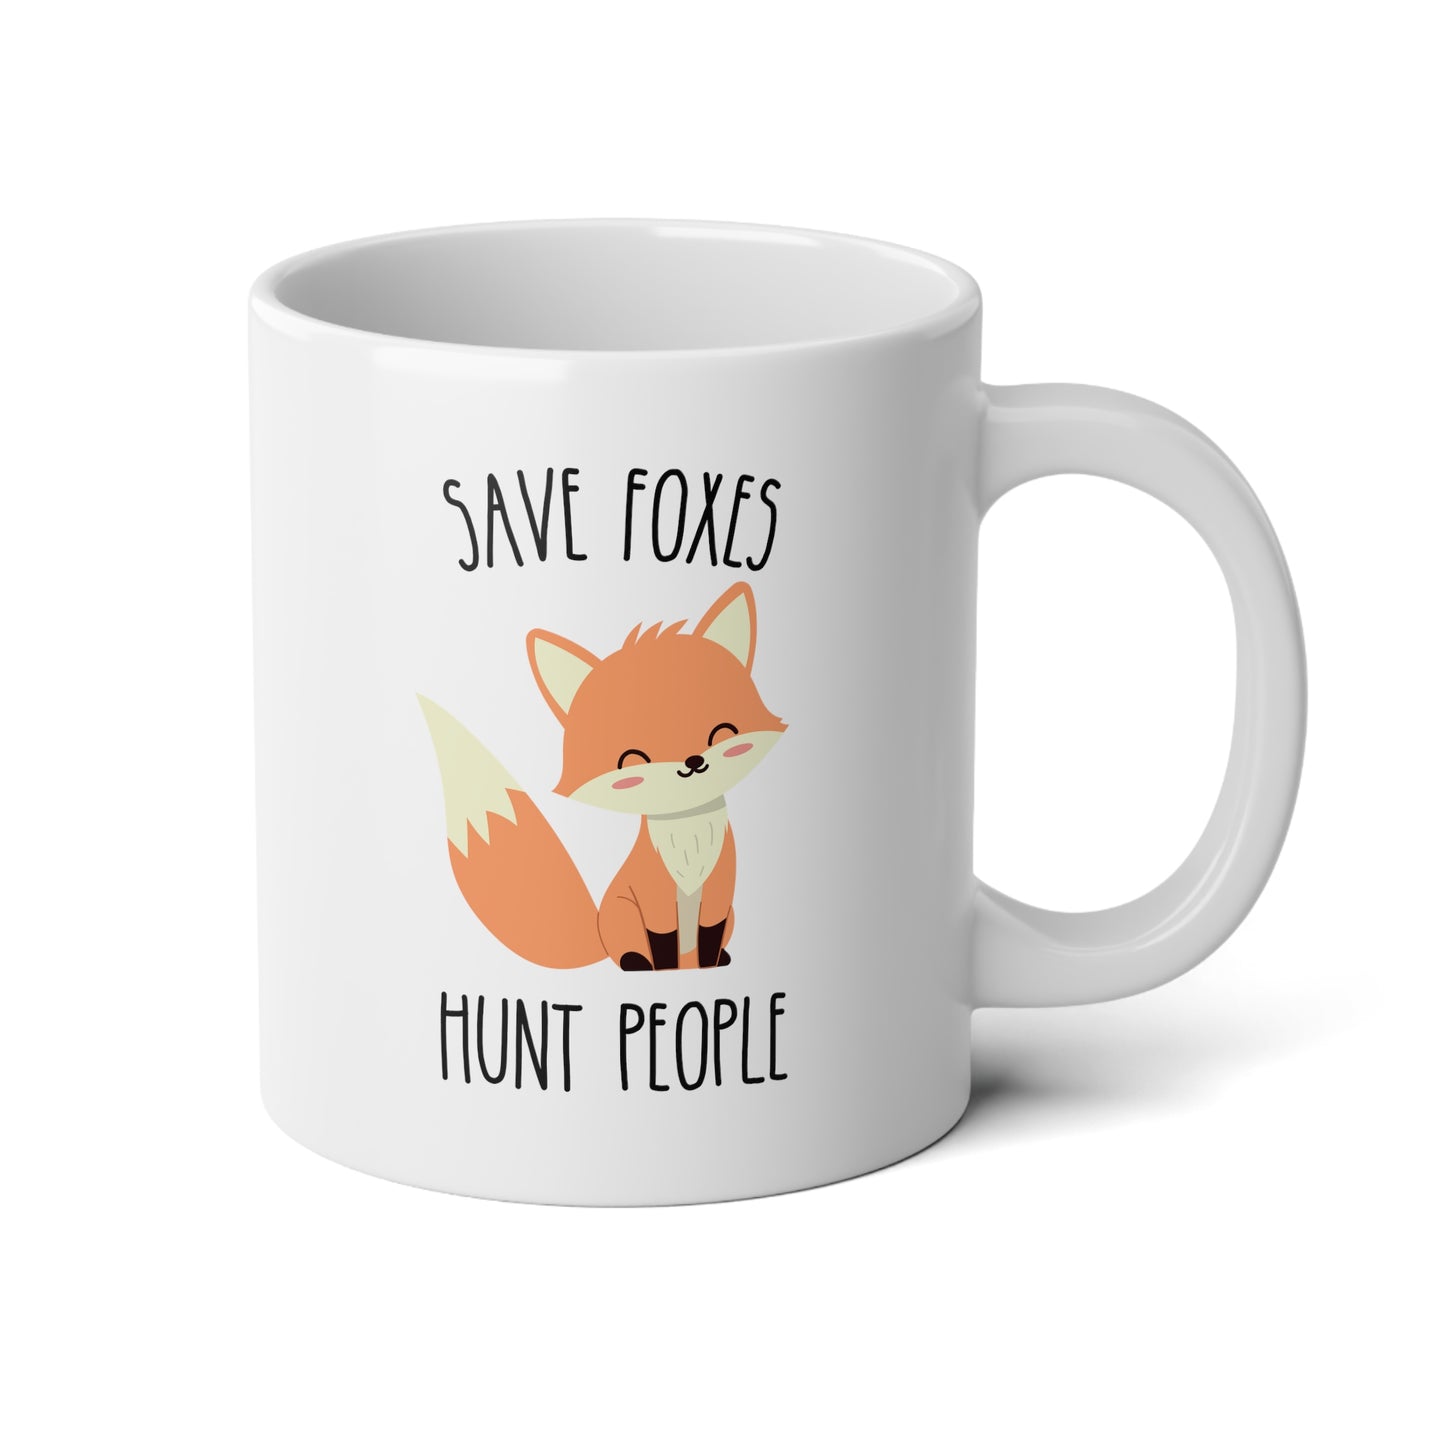 Save Foxes Hunt People 20oz white funny large coffee mug gift for vegetarian vegan animal rights cute hipster quirky rude present wavey wares wavywares wavy wares